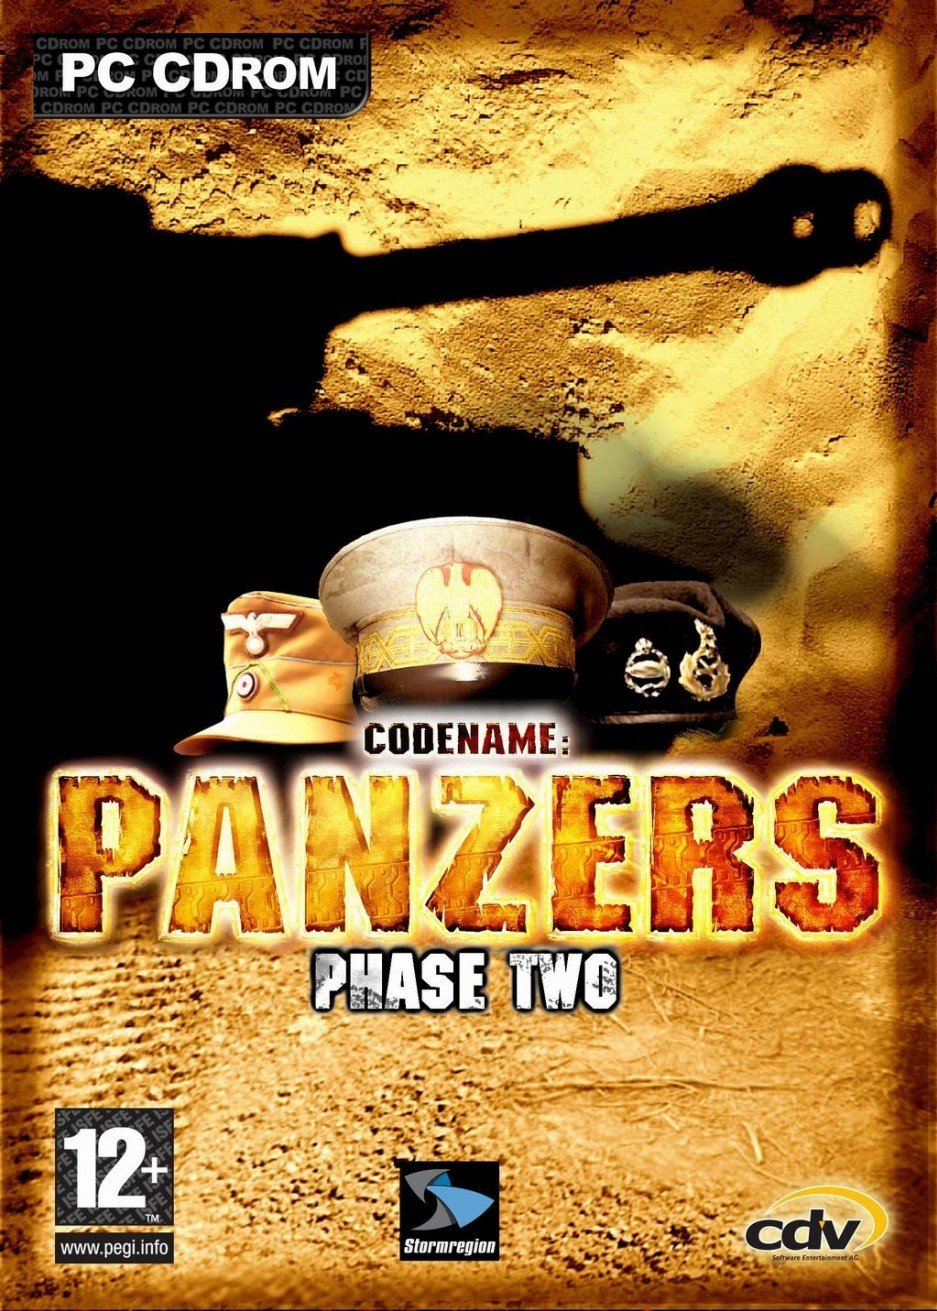 Image of Codename: Panzers - Phase Two